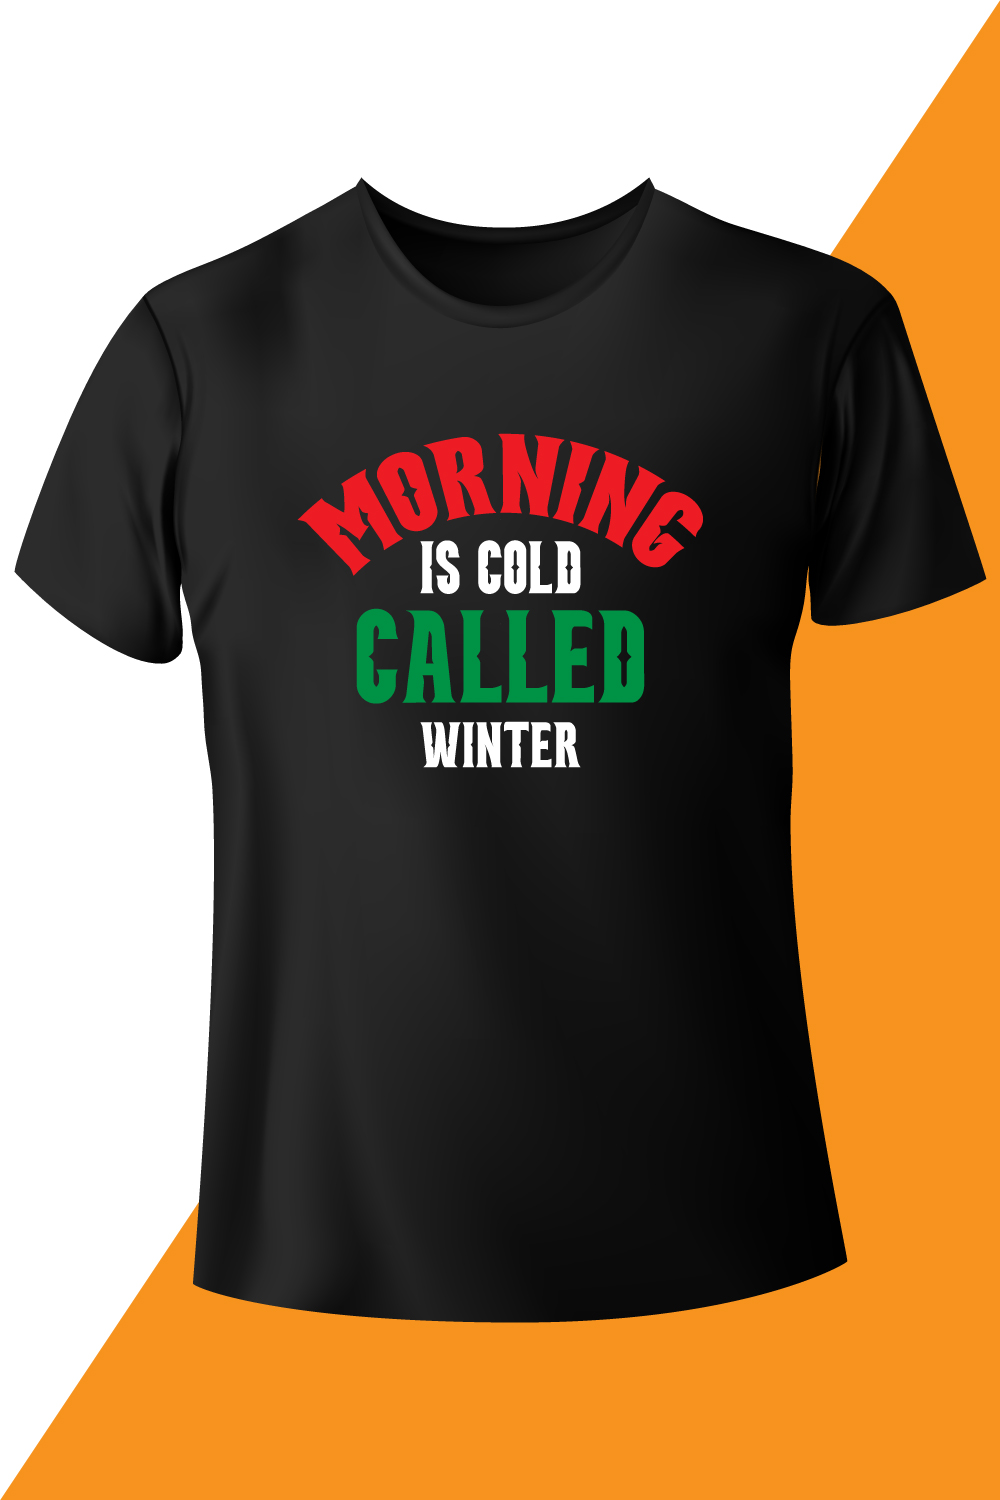 Image of a black t-shirt with exquisite lettering morning is cold called winter.